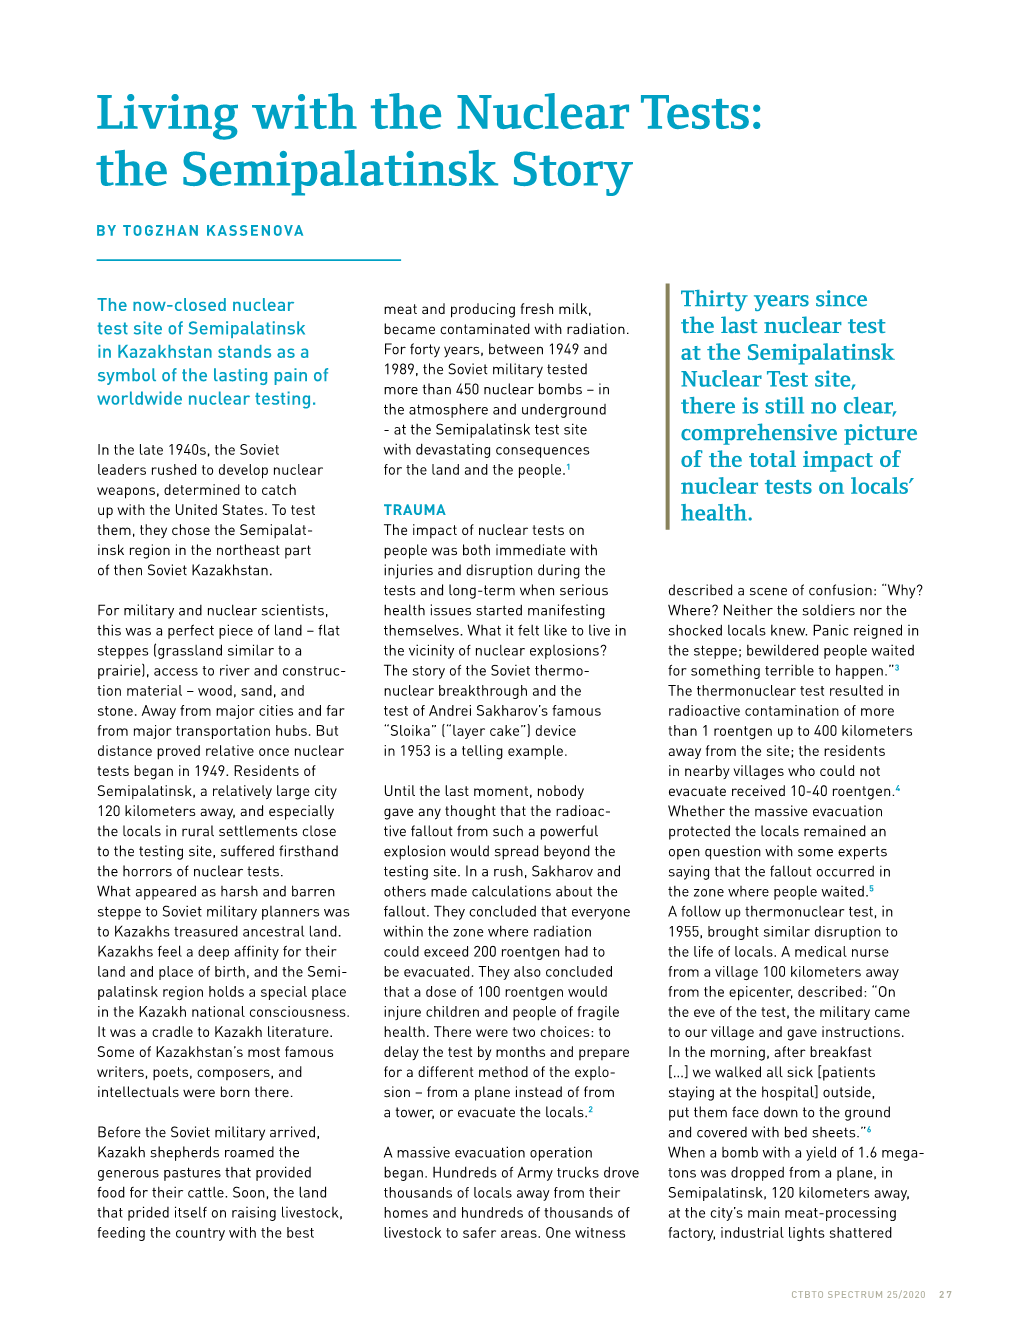 Living with the Nuclear Tests: the Semipalatinsk Story